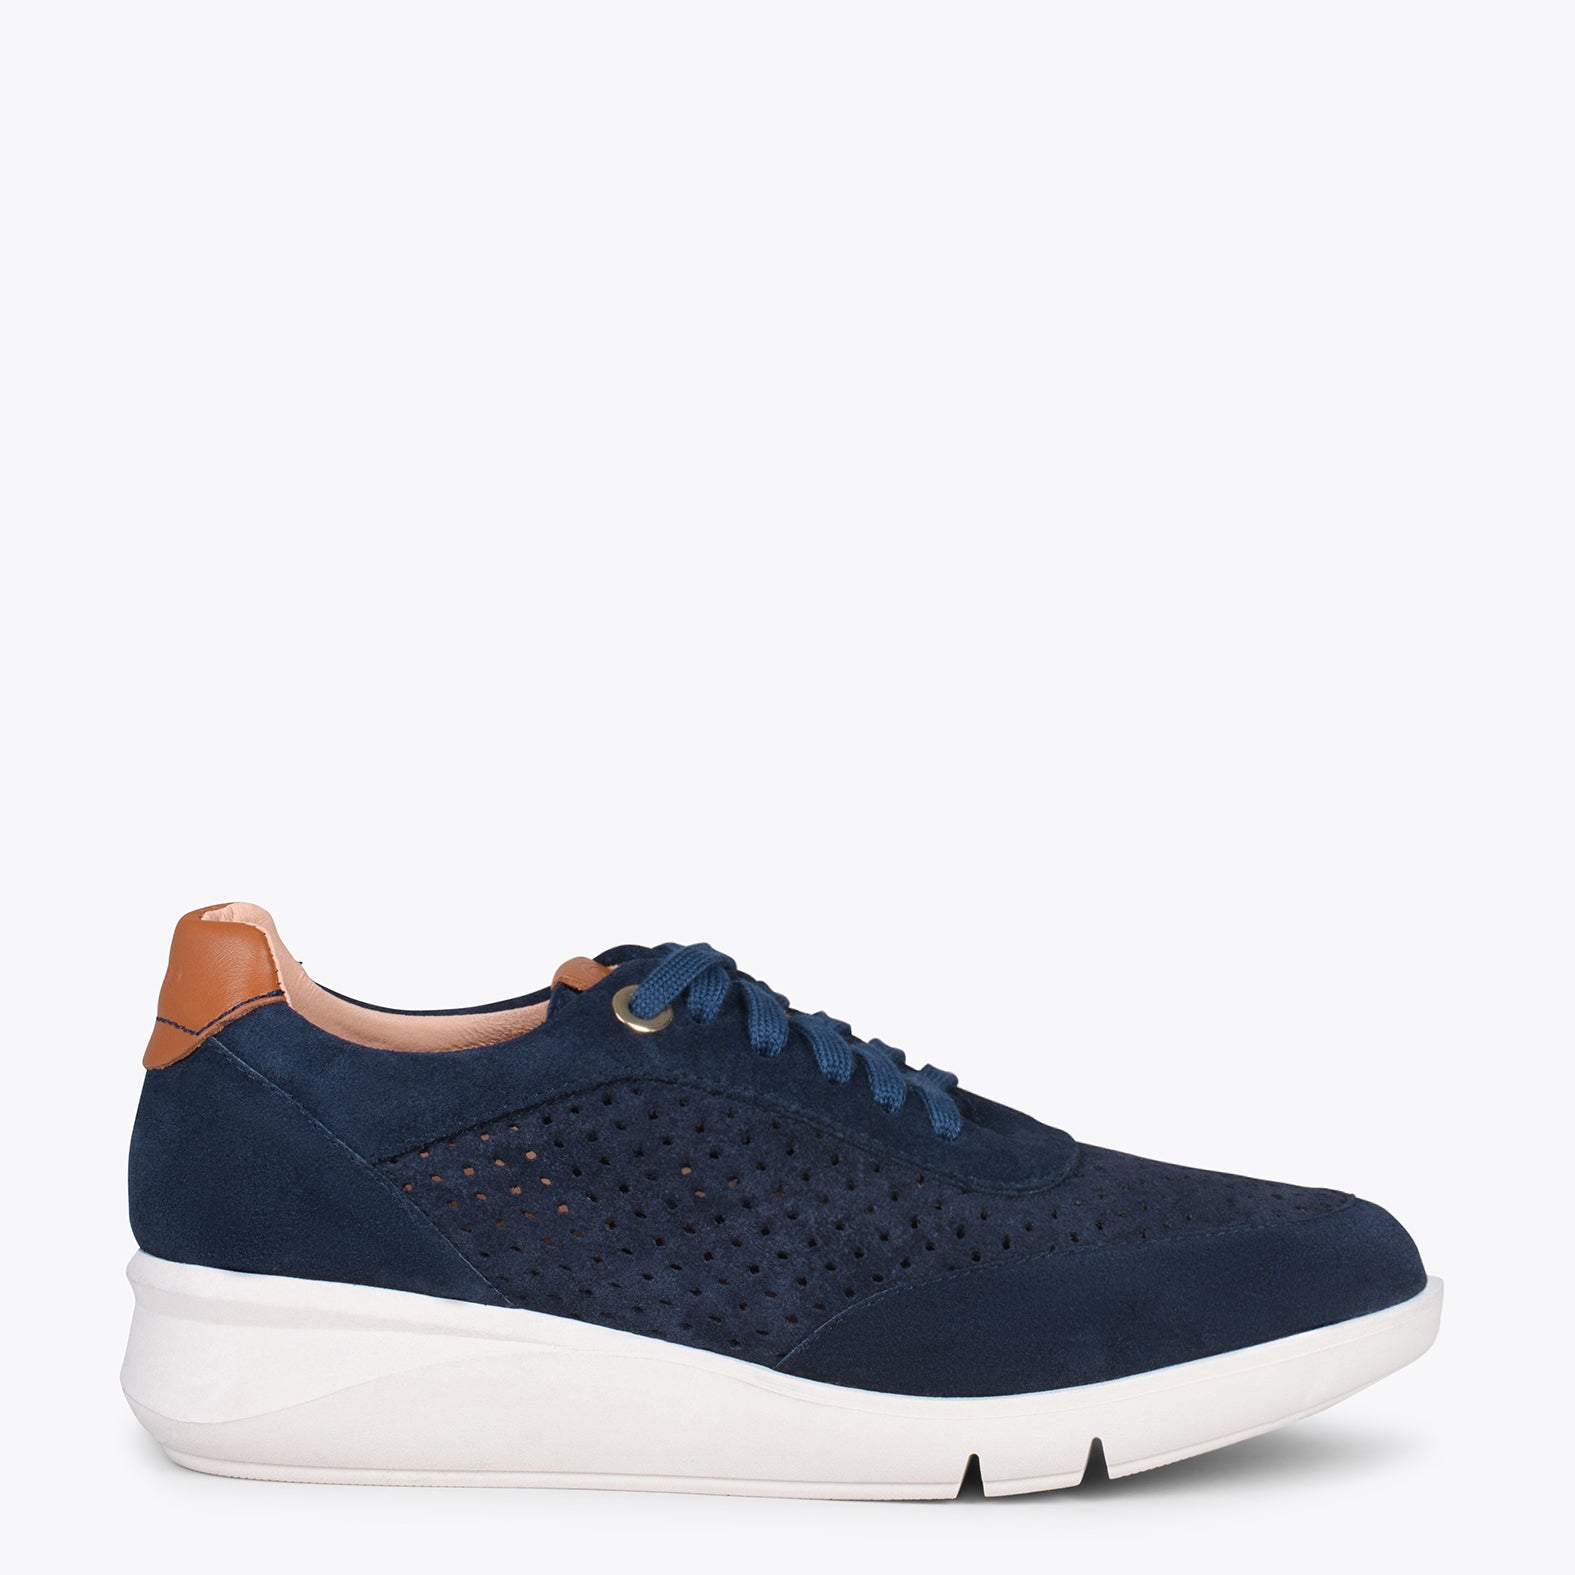 SPORT BLUCHER – NAVY sneakers with wedge